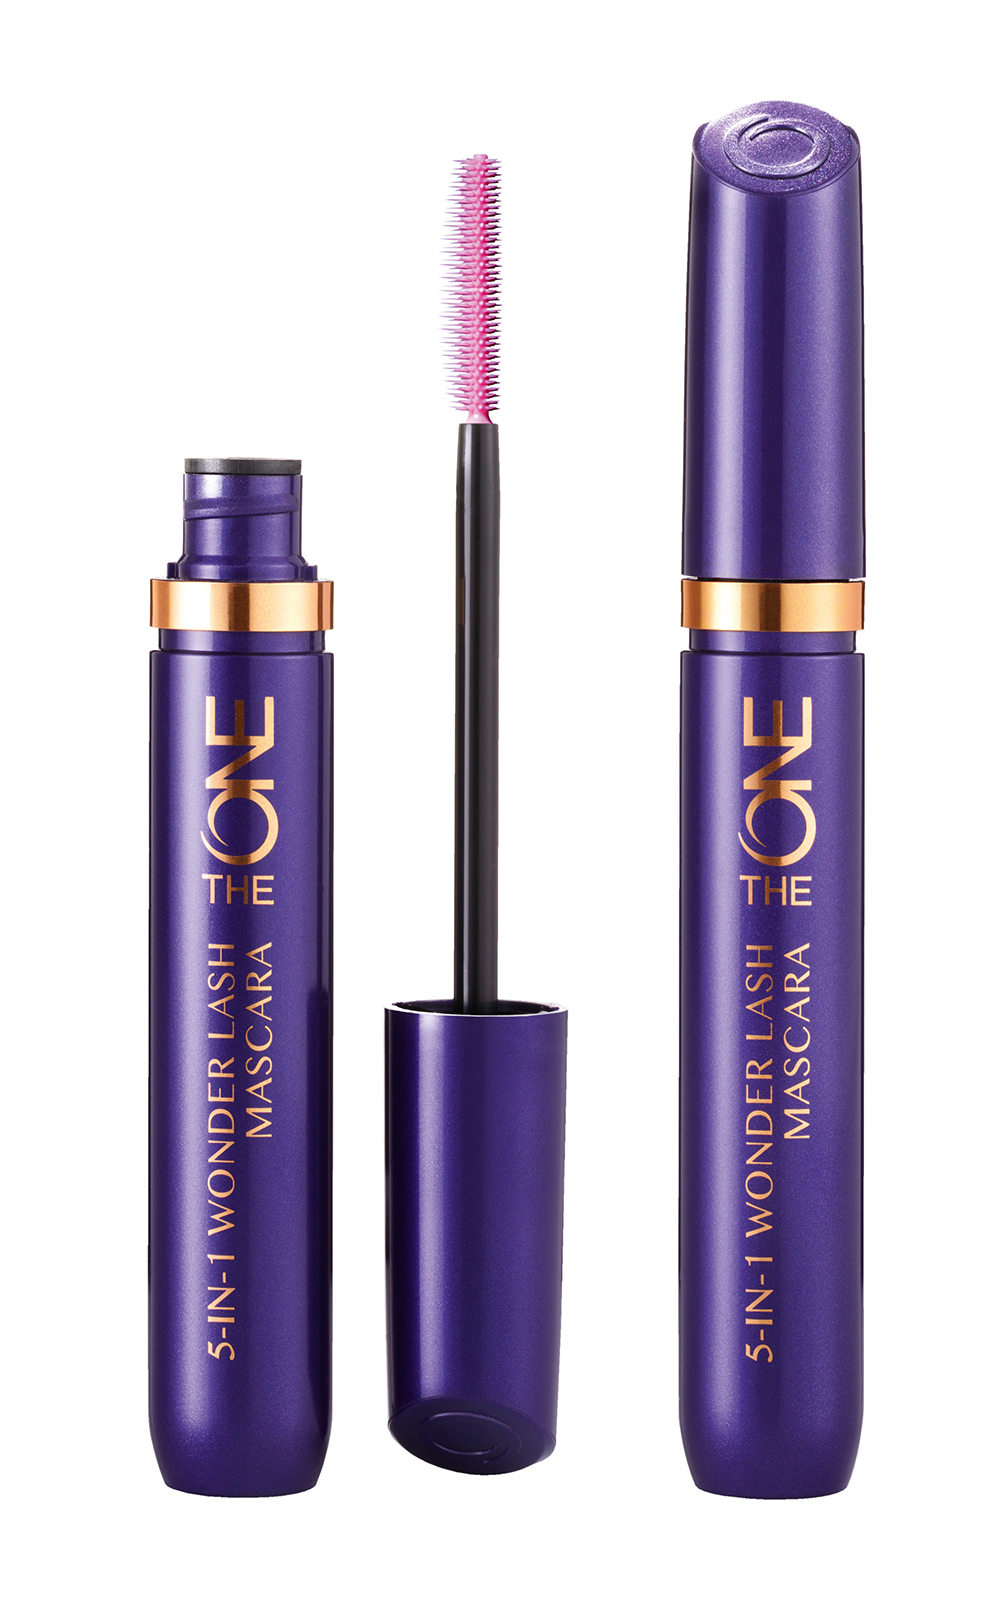 oriflame-5-in-1-mascara-the-one